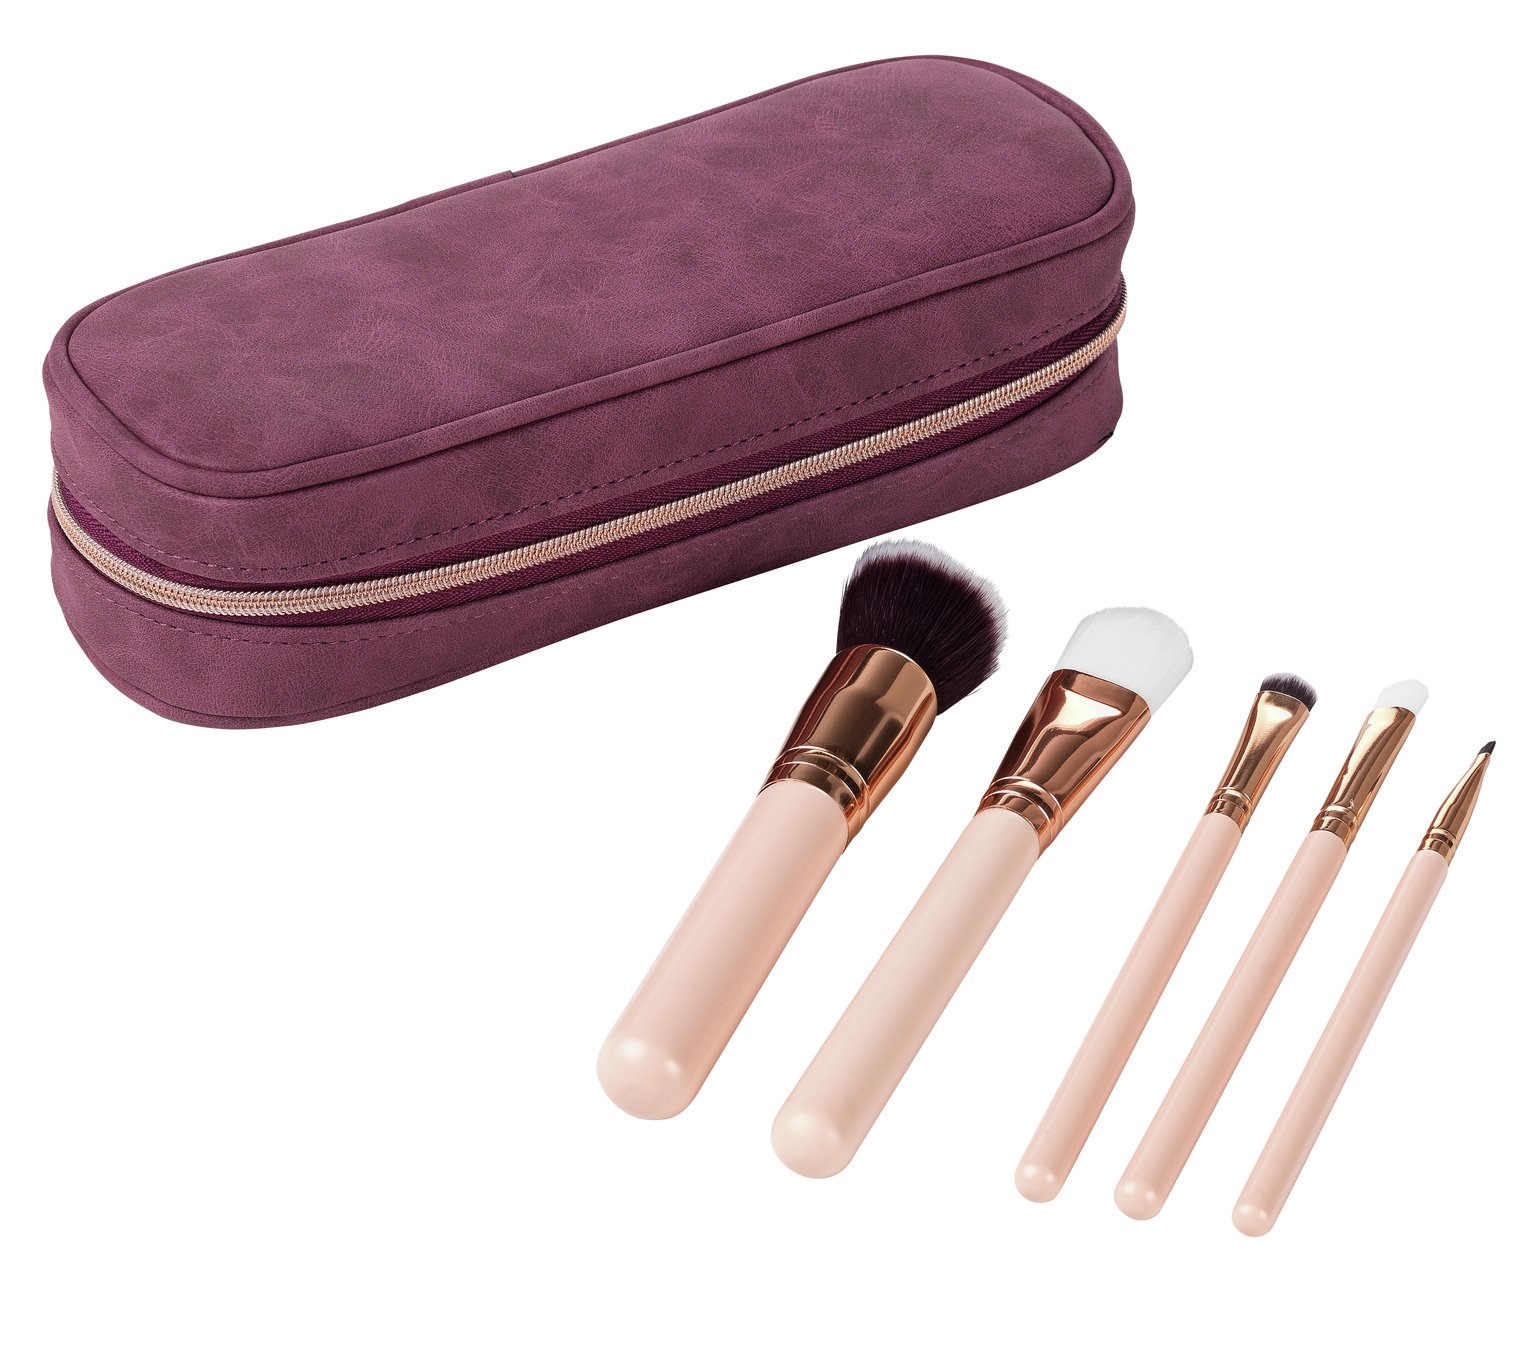 Tranquil Retreat Makeup Brushes & Case